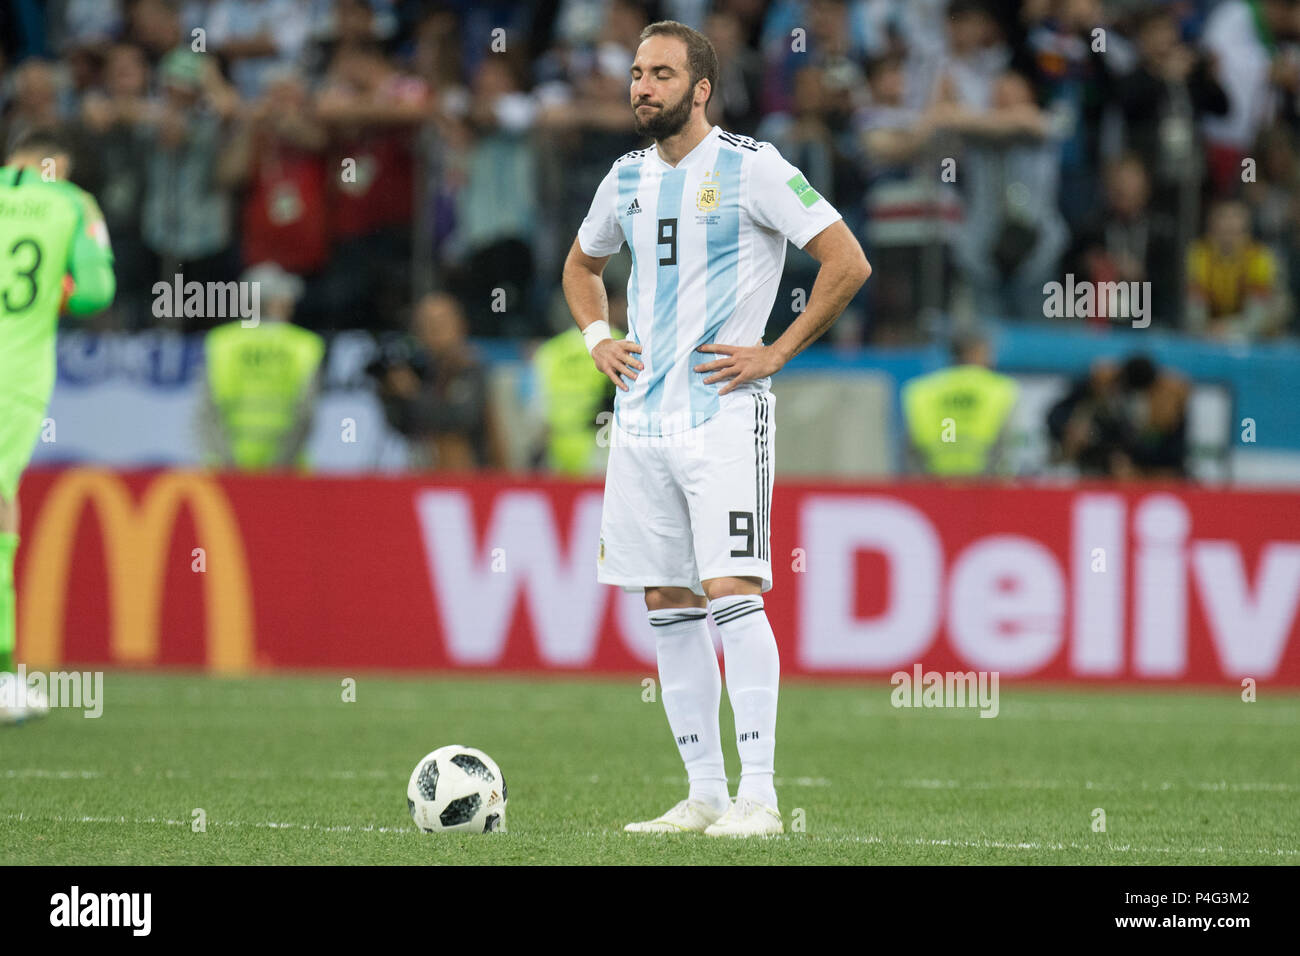 Nizhny Novgorod, Russia. 21 June 2018.  Gonzalo HIGUAIN (ARG) is disappointed after the goal to Croatia 2-0, disappointed, disappointed, disappointed, disappointed, sad, frustrated, frustrated, frustratedet, full figure, Argentina (ARG) - Croatia (CRO) 0: 3, preliminary round, group D, game 23, on 21.06.2018 in Moscow; Football World Cup 2018 in Russia from 14.06. - 15.07.2018. | usage worldwide Credit: dpa/Alamy Live News Credit: dpa picture alliance/Alamy Live News Stock Photo